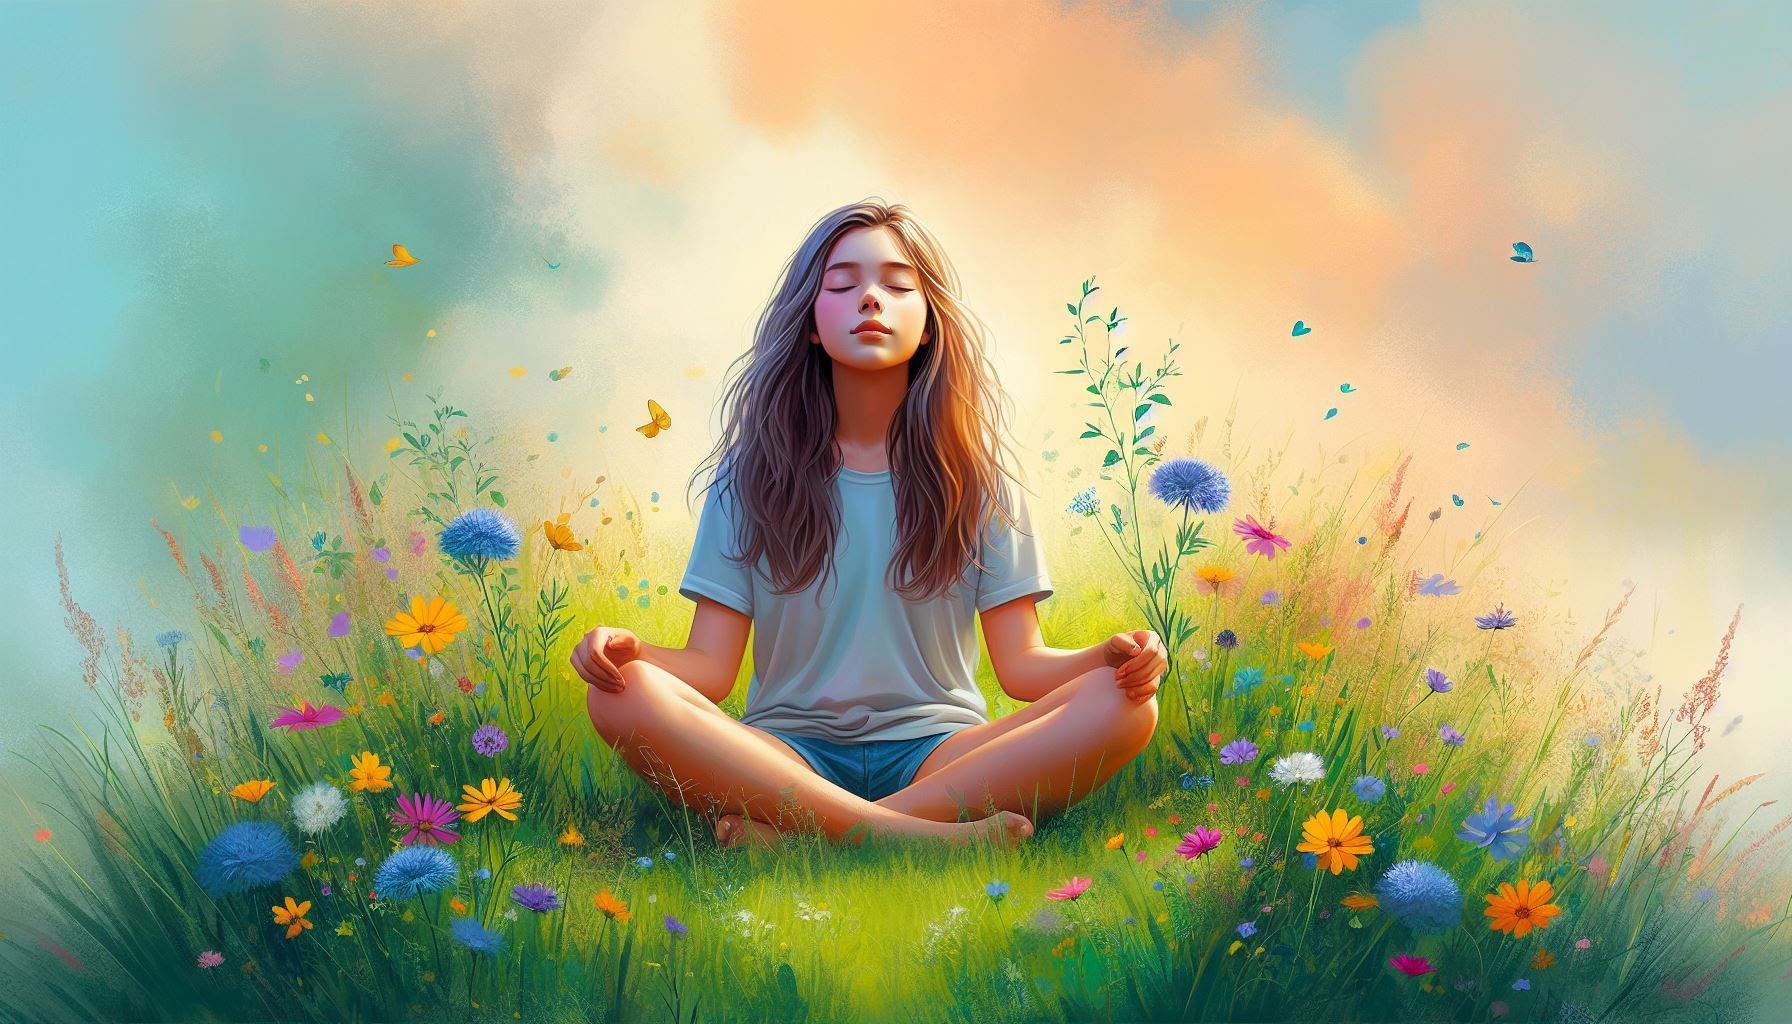 5 Steps to Find Your Inner Balance and Feel Less Anxious